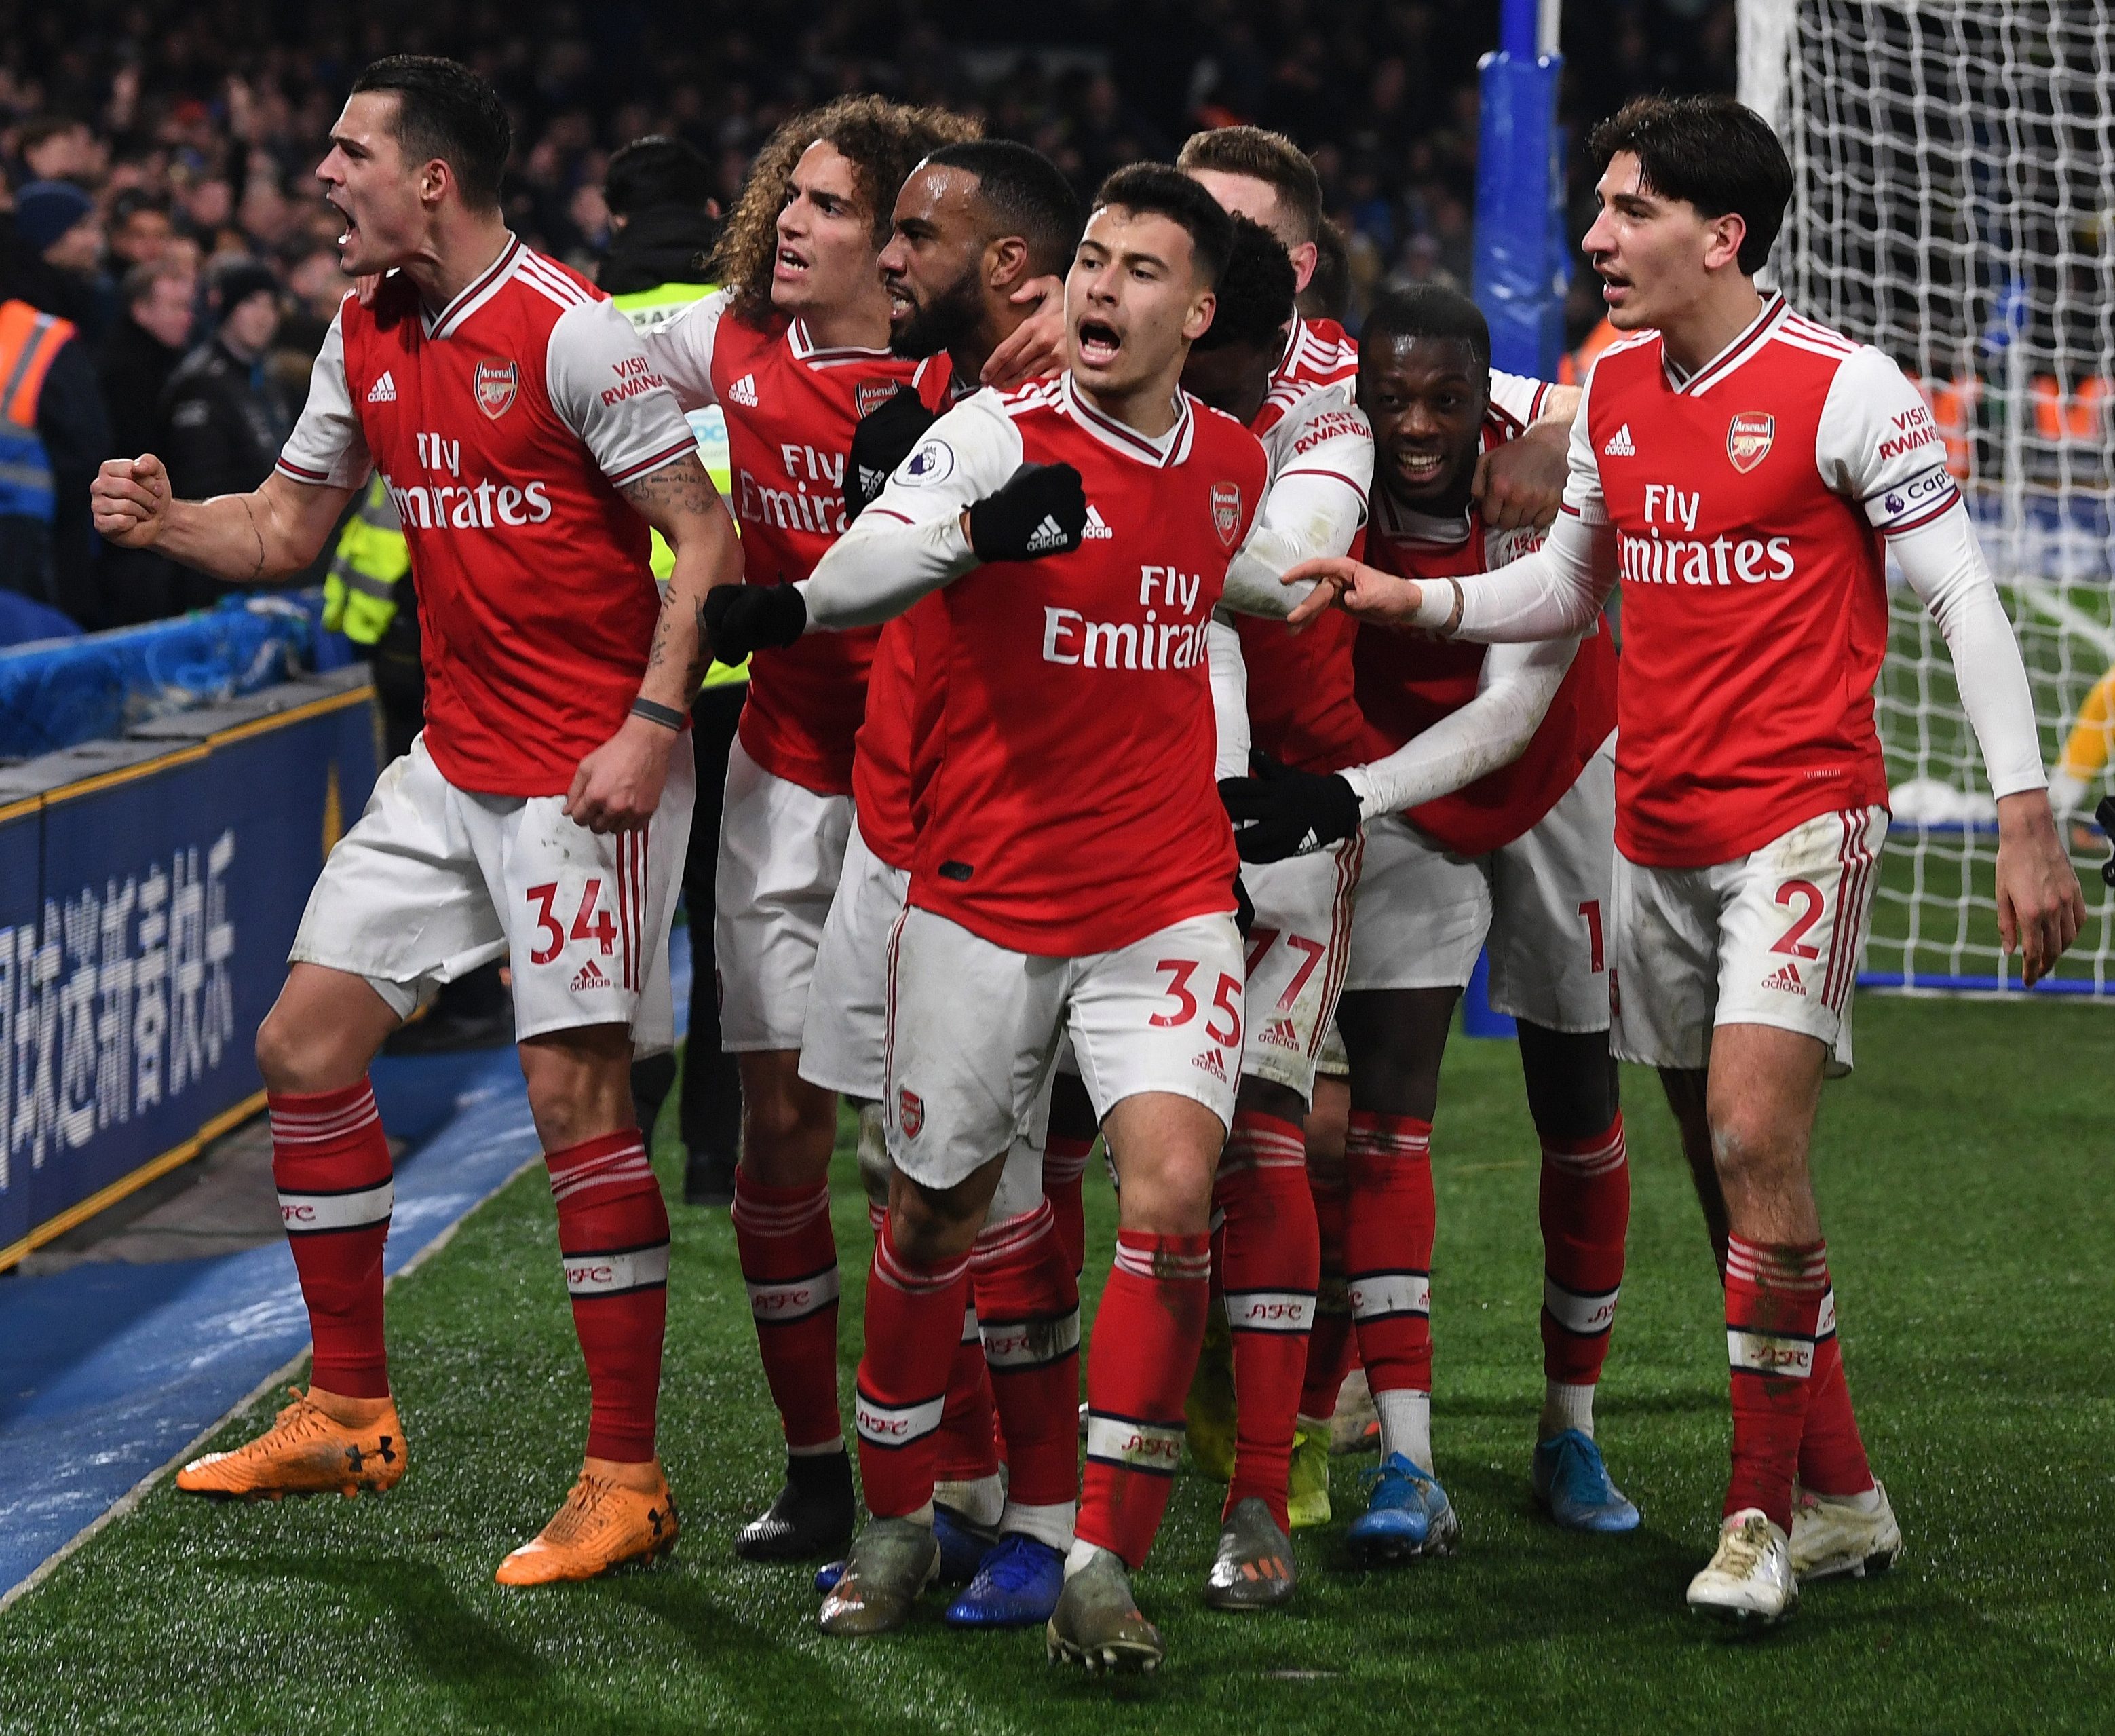 Landmand hypotese bord FA Cup Champions - Arsenal deserved winners in exciting tie - Just Arsenal  News